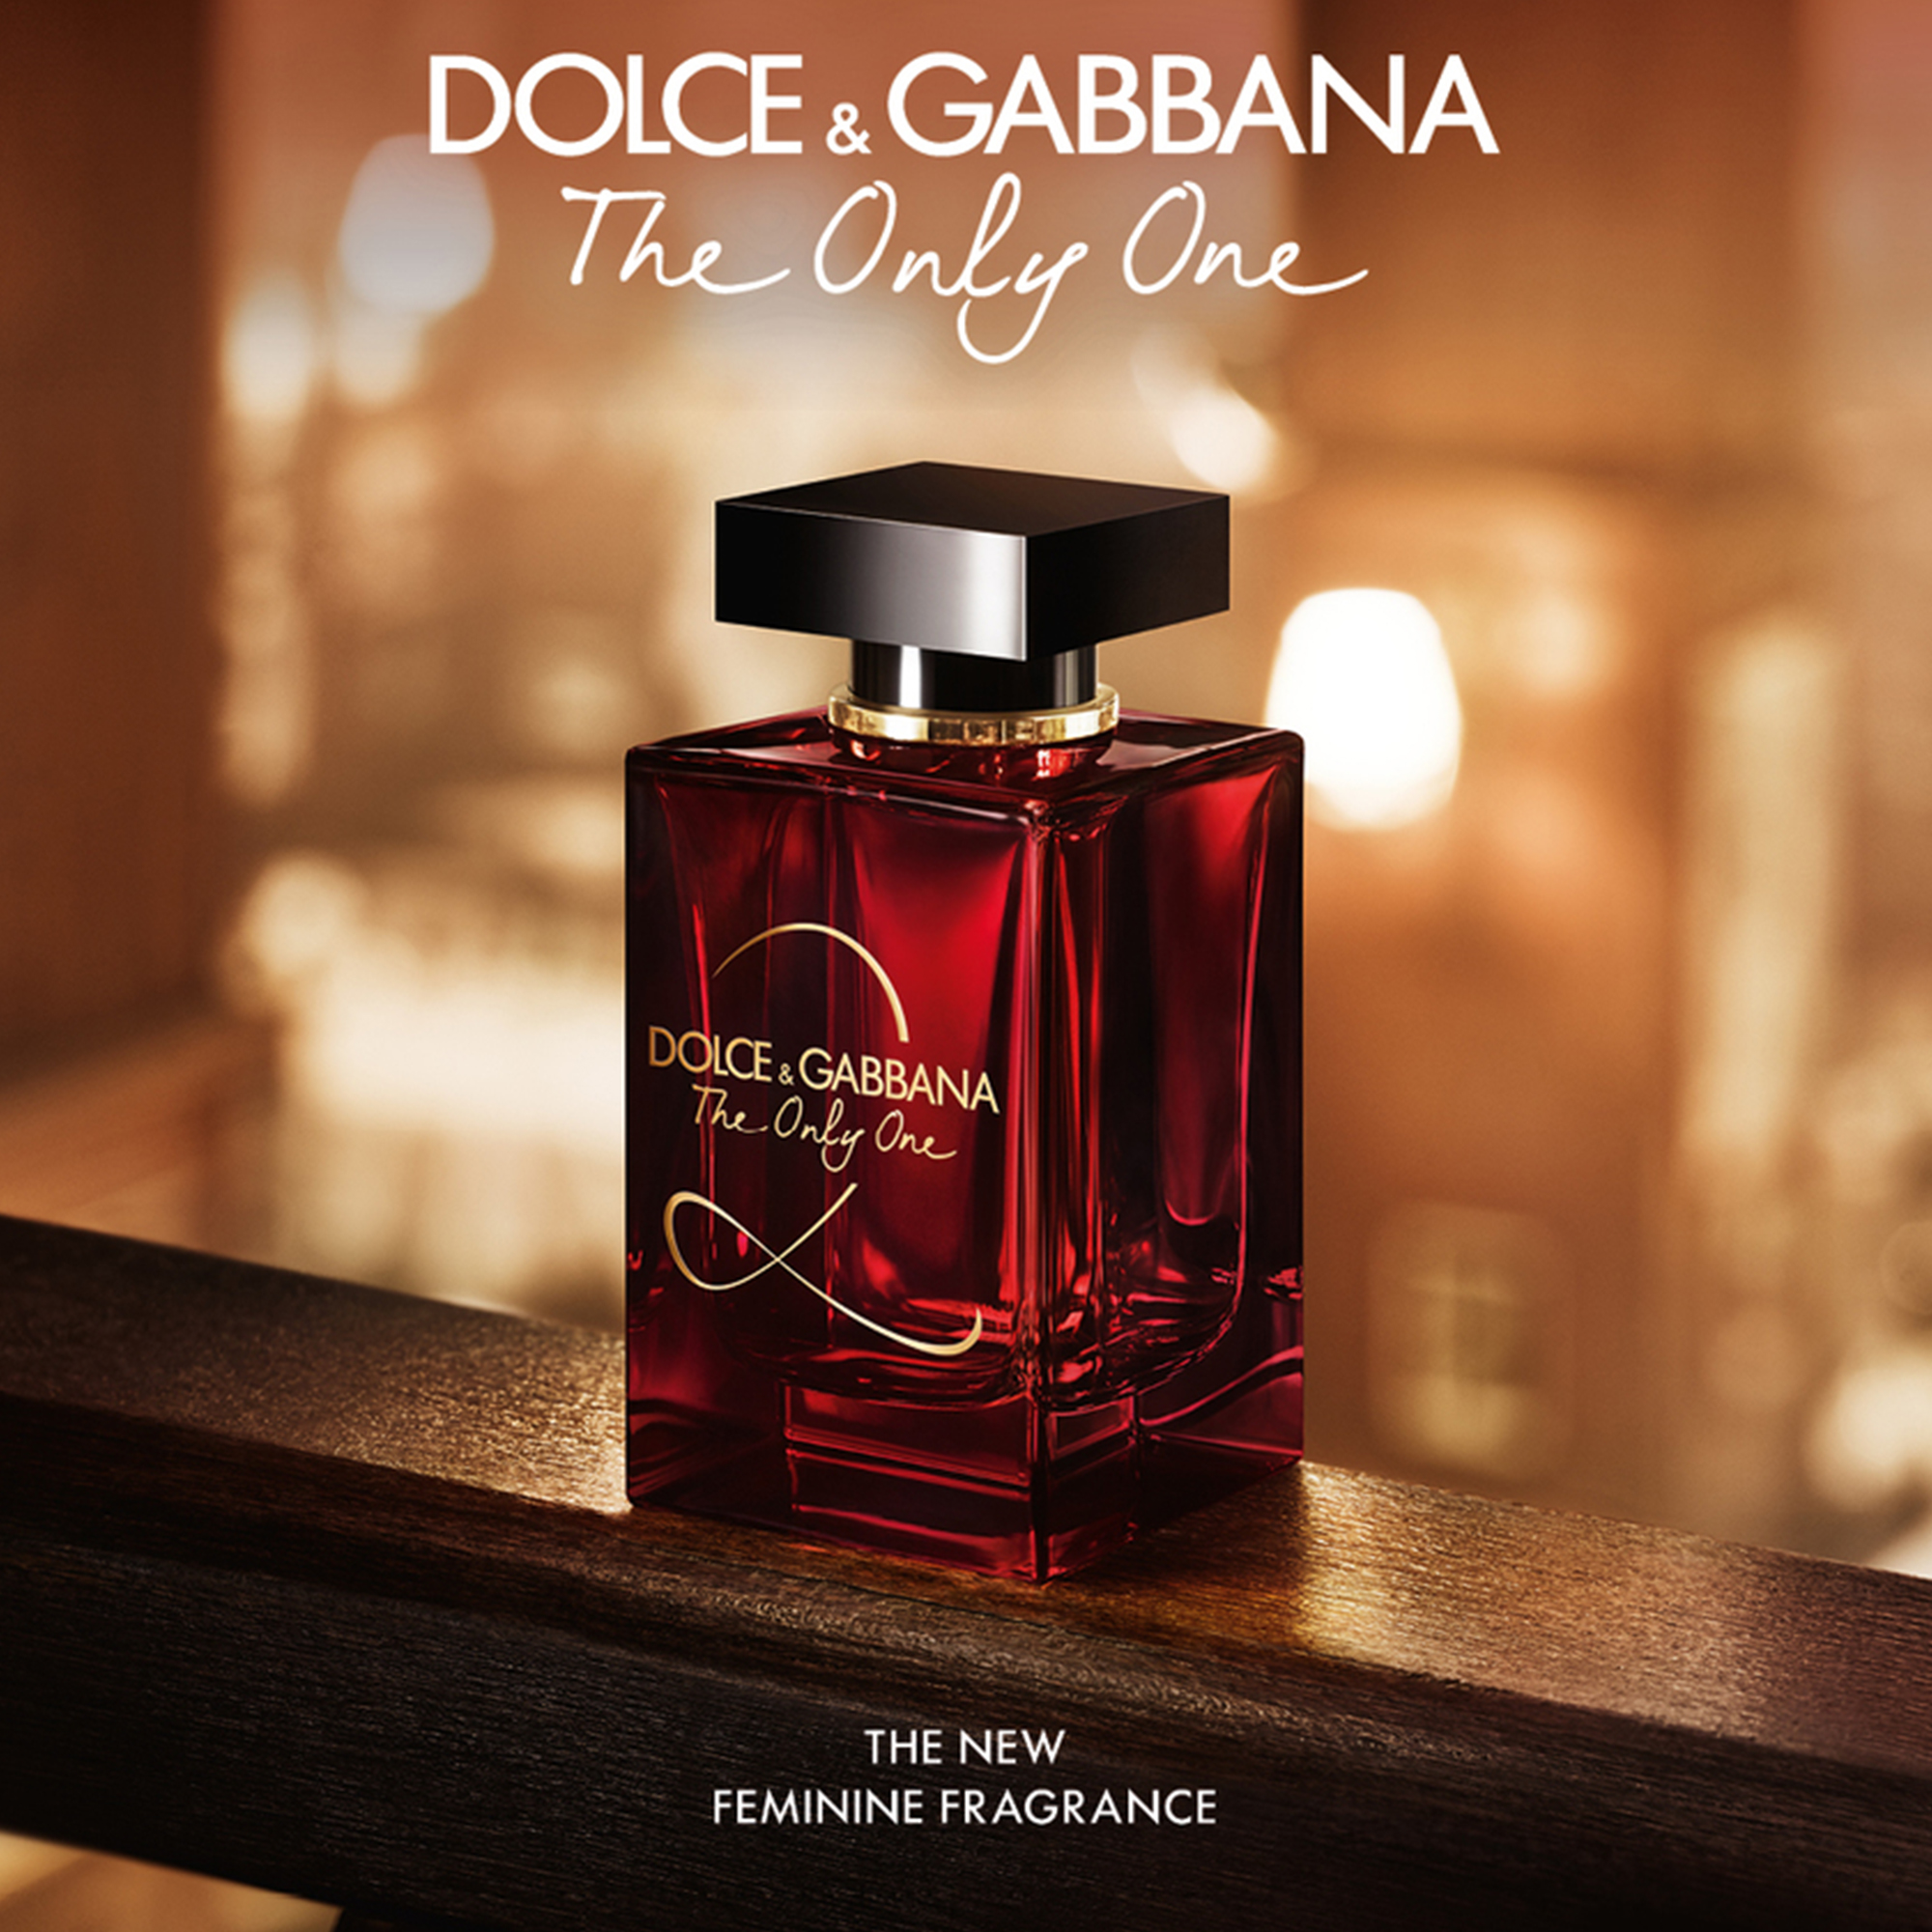 Духи dolce only one. Dolce& Gabbana the only one 2 EDP, 100 ml. Dolce Gabbana the only one 2 100 мл. Dolce Gabbana the only one 2 EDP. Dolce & Gabbana the only one 100 мл.